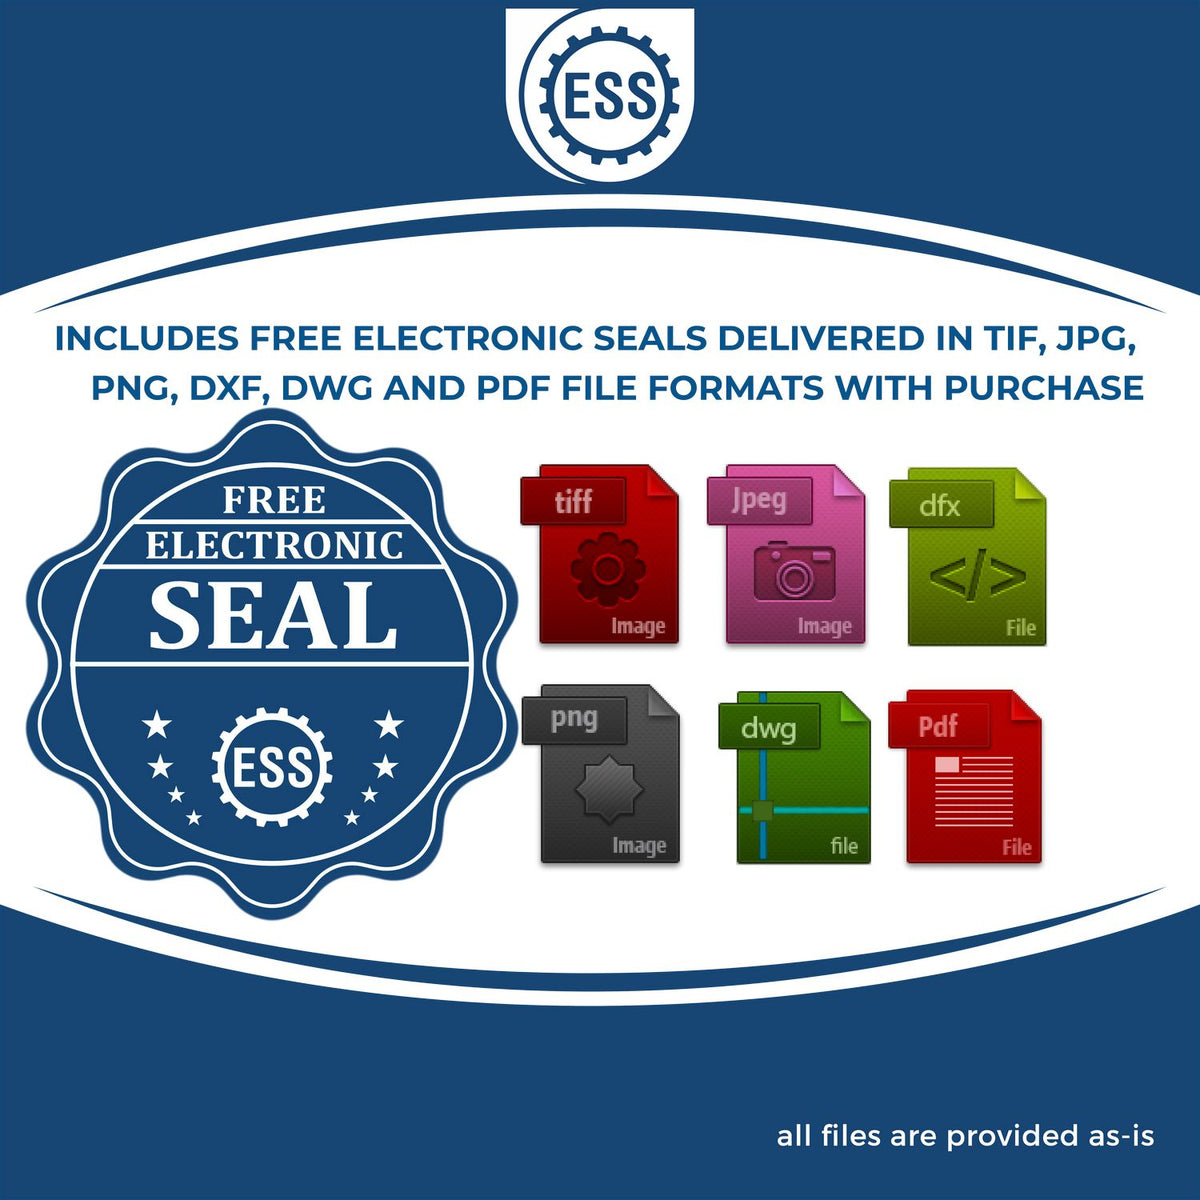 An infographic for the free electronic seal for the PSI Alaska Notary Stamp illustrating the different file type icons such as DXF, DWG, TIF, JPG and PNG.